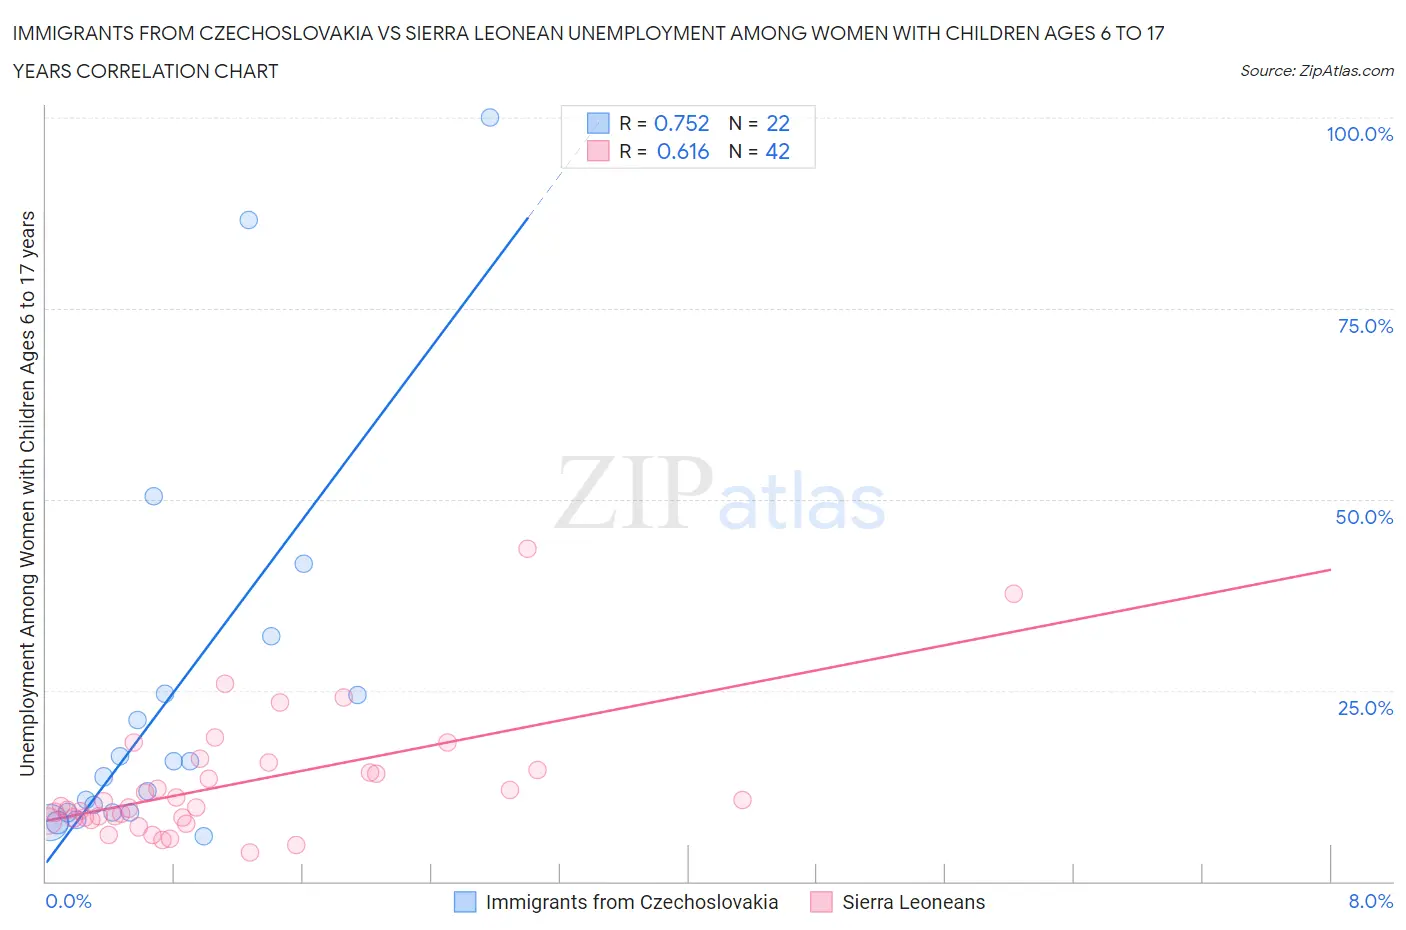 Immigrants from Czechoslovakia vs Sierra Leonean Unemployment Among Women with Children Ages 6 to 17 years